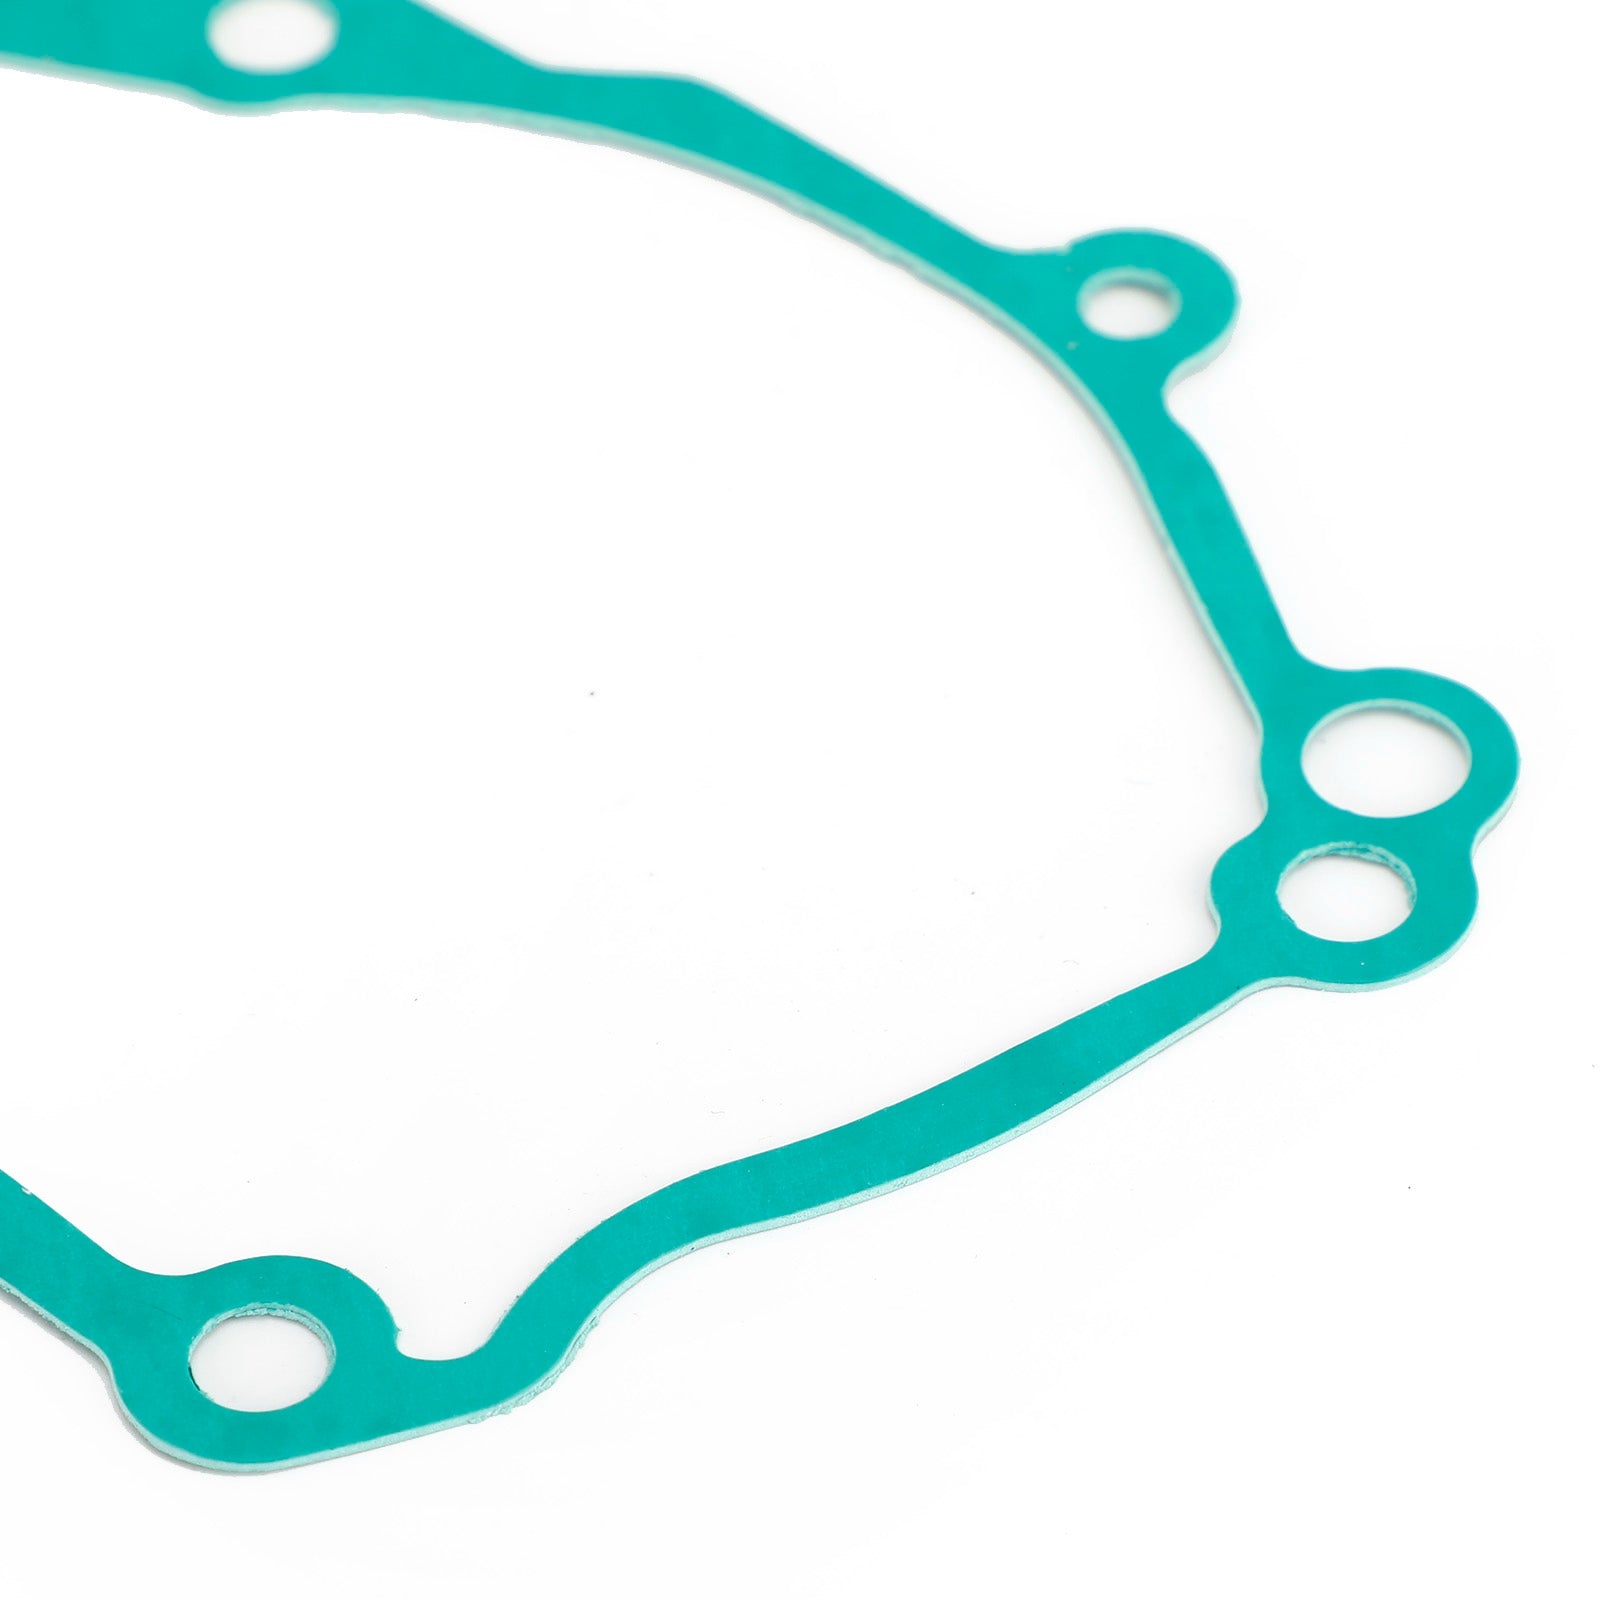 3x 2004-2015 Yamaha YZF R1 R1S FZ1 FZ8 N NA S SA Left side Engine Crankcase Cover Gasket 5VY-15451-00 5VY-15451-10 2D1-15451-10